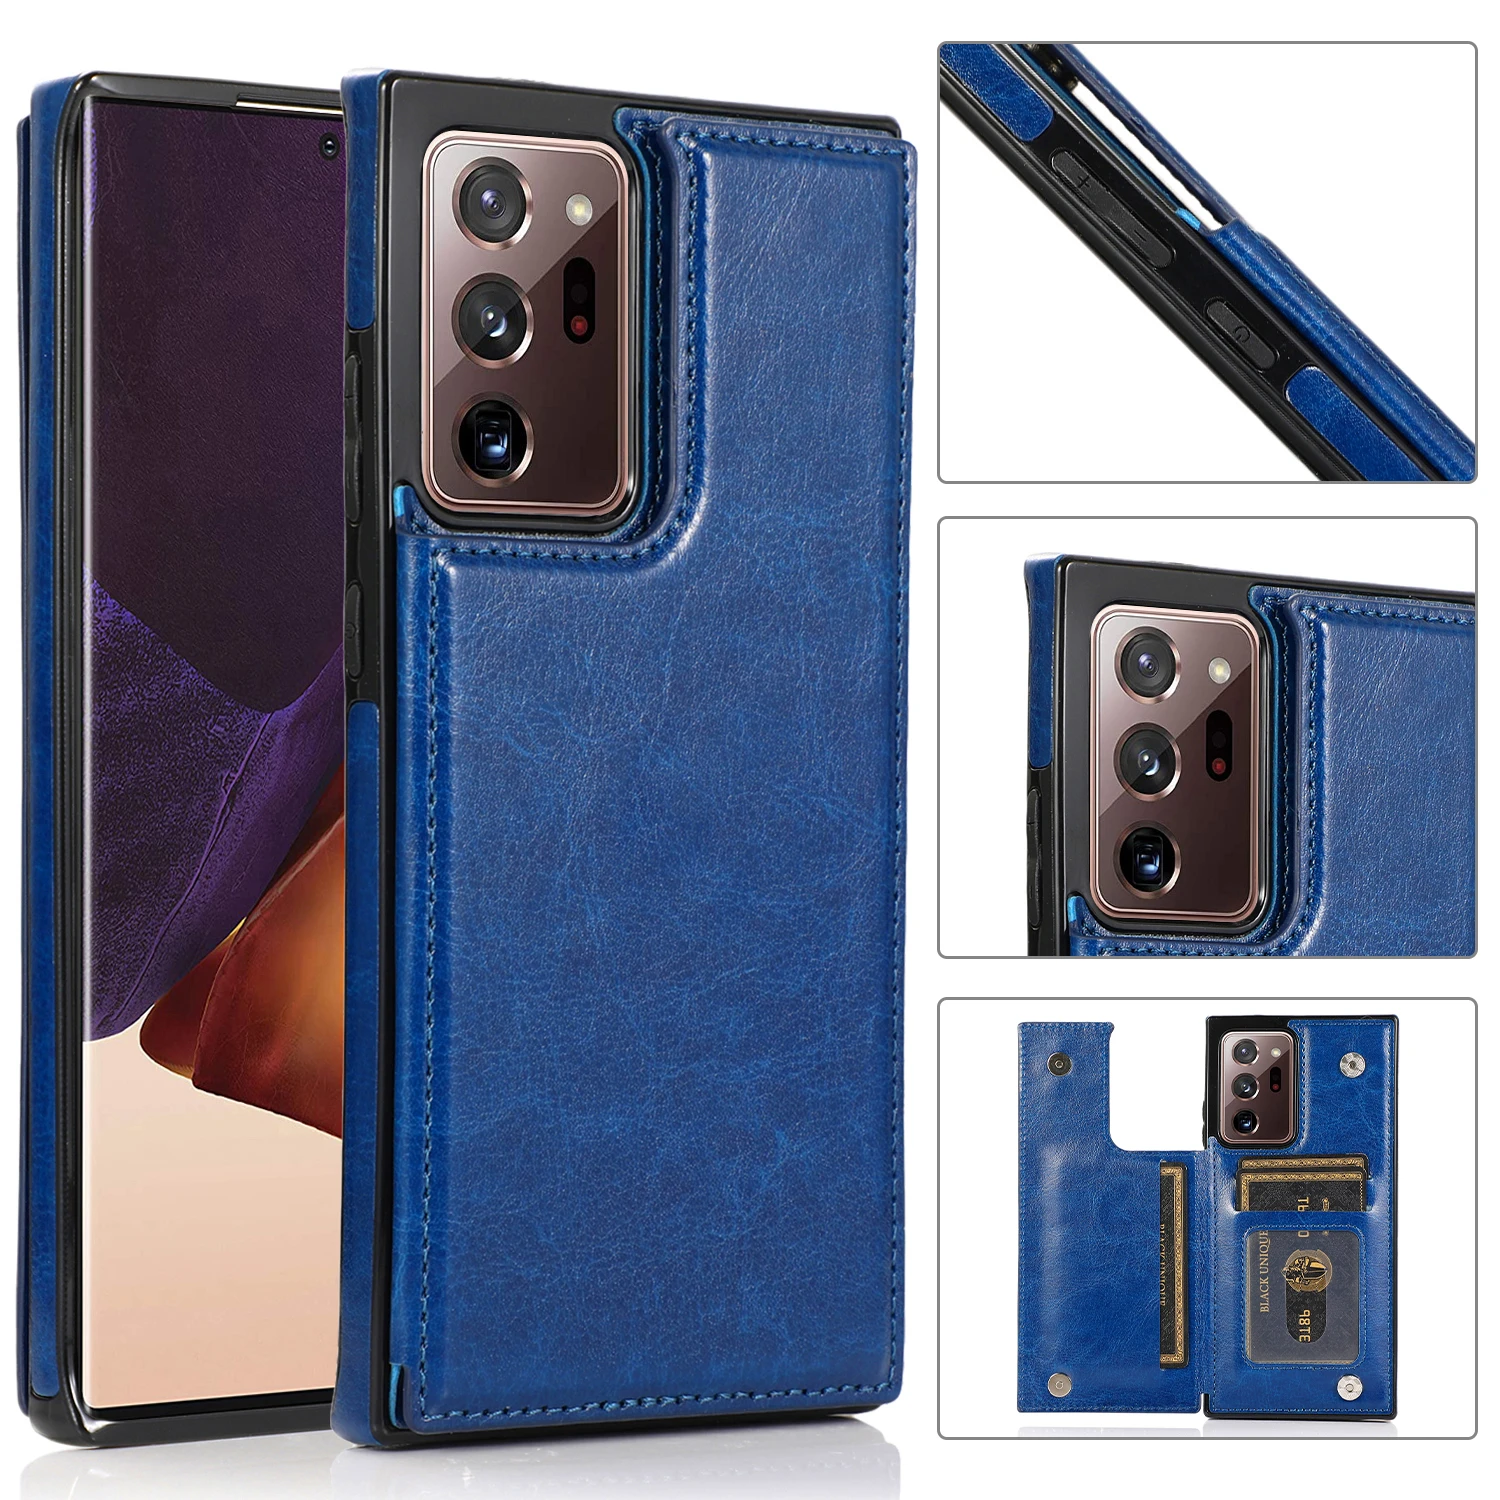 Luxury Slim Fit Leather Wallet Case For Samsung Galaxy S21 Ultra S20 FE S9 Plus Note 20 10 Lite With Card Slot Shockproof Cover